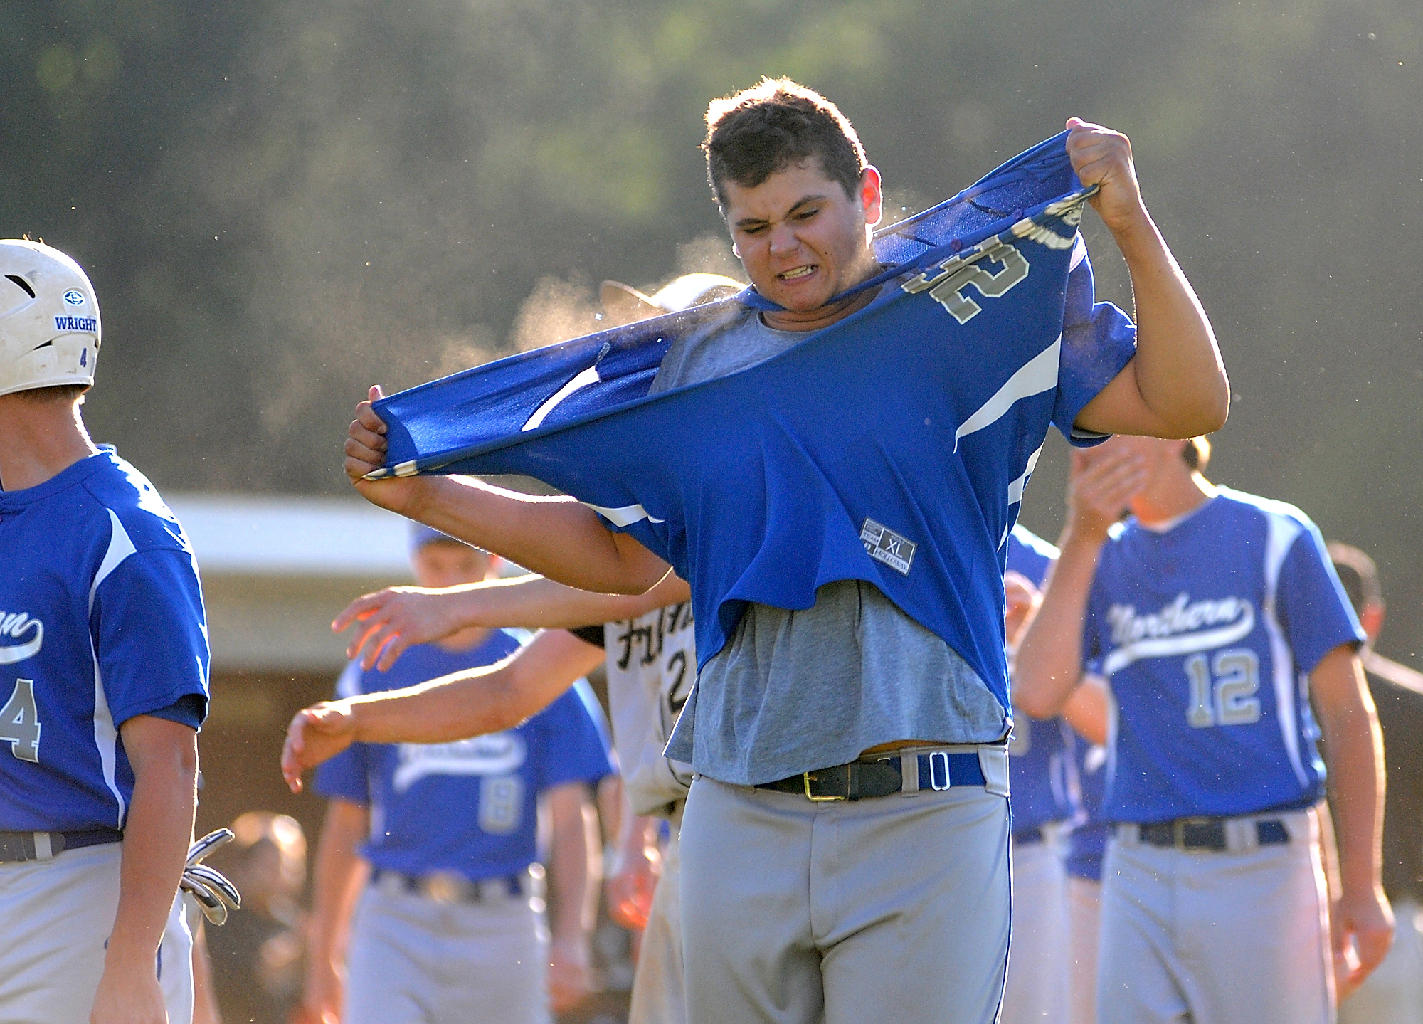  Northern Burlington's Zach Gakeler (32) rips his jersey immediately following their last out of the game, losing their state Group 3 semifinal game at Rider University in Lawrencville, NJ to Burlington Township. 